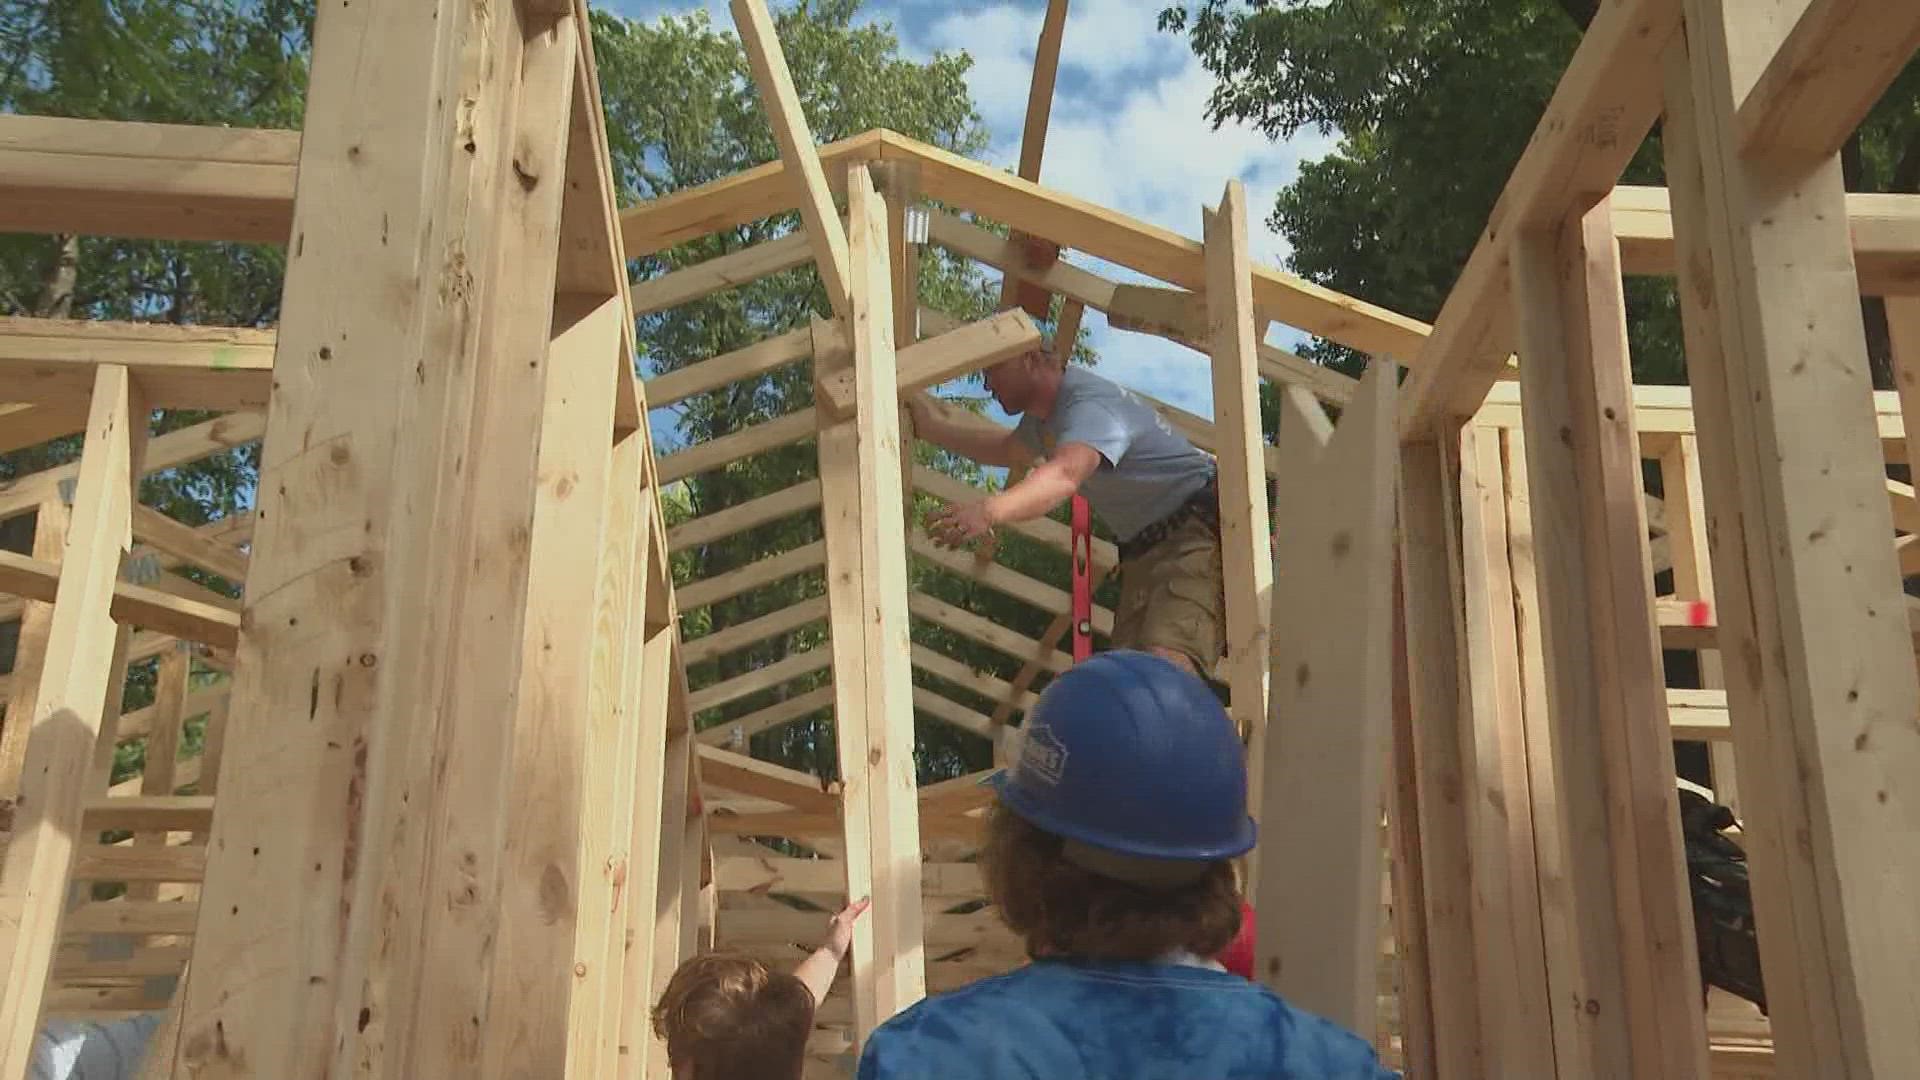 Habitat for Humanity says they'll have another round of applications for homes starting Oct. 1 through Oct. 15.